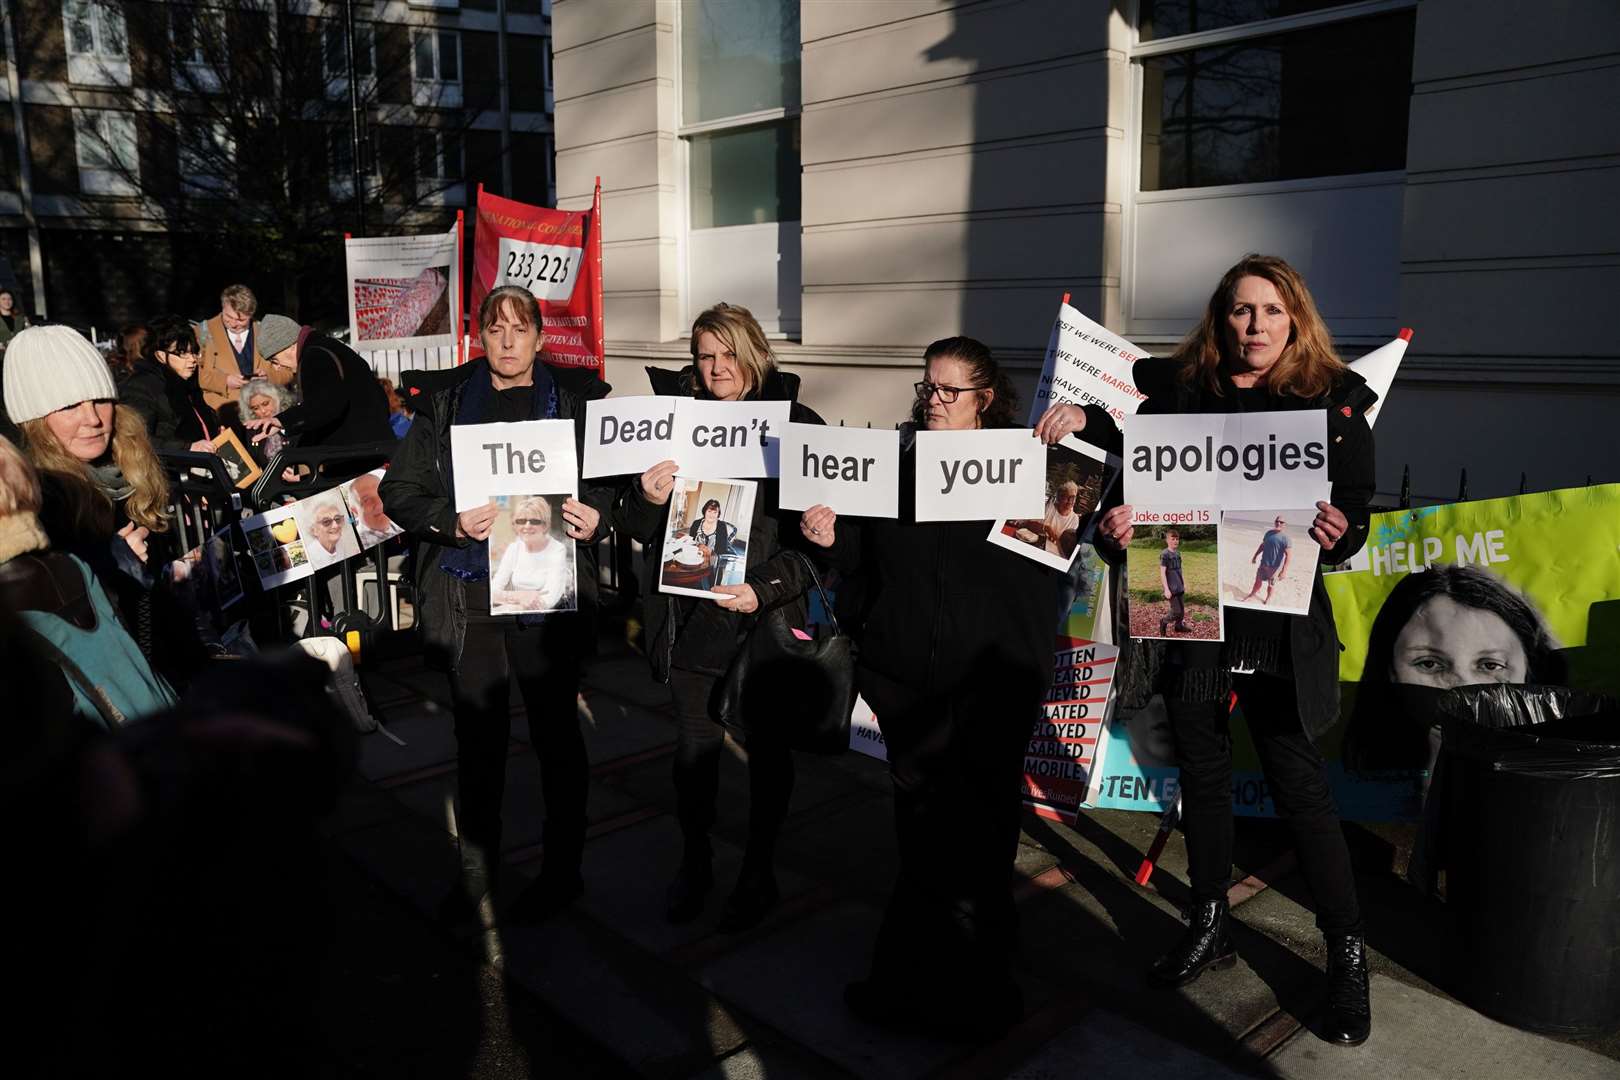 The women held photos of their loved ones and signs that read ‘The dead can’t hear your apologies'(Jordan Pettitt/PA)